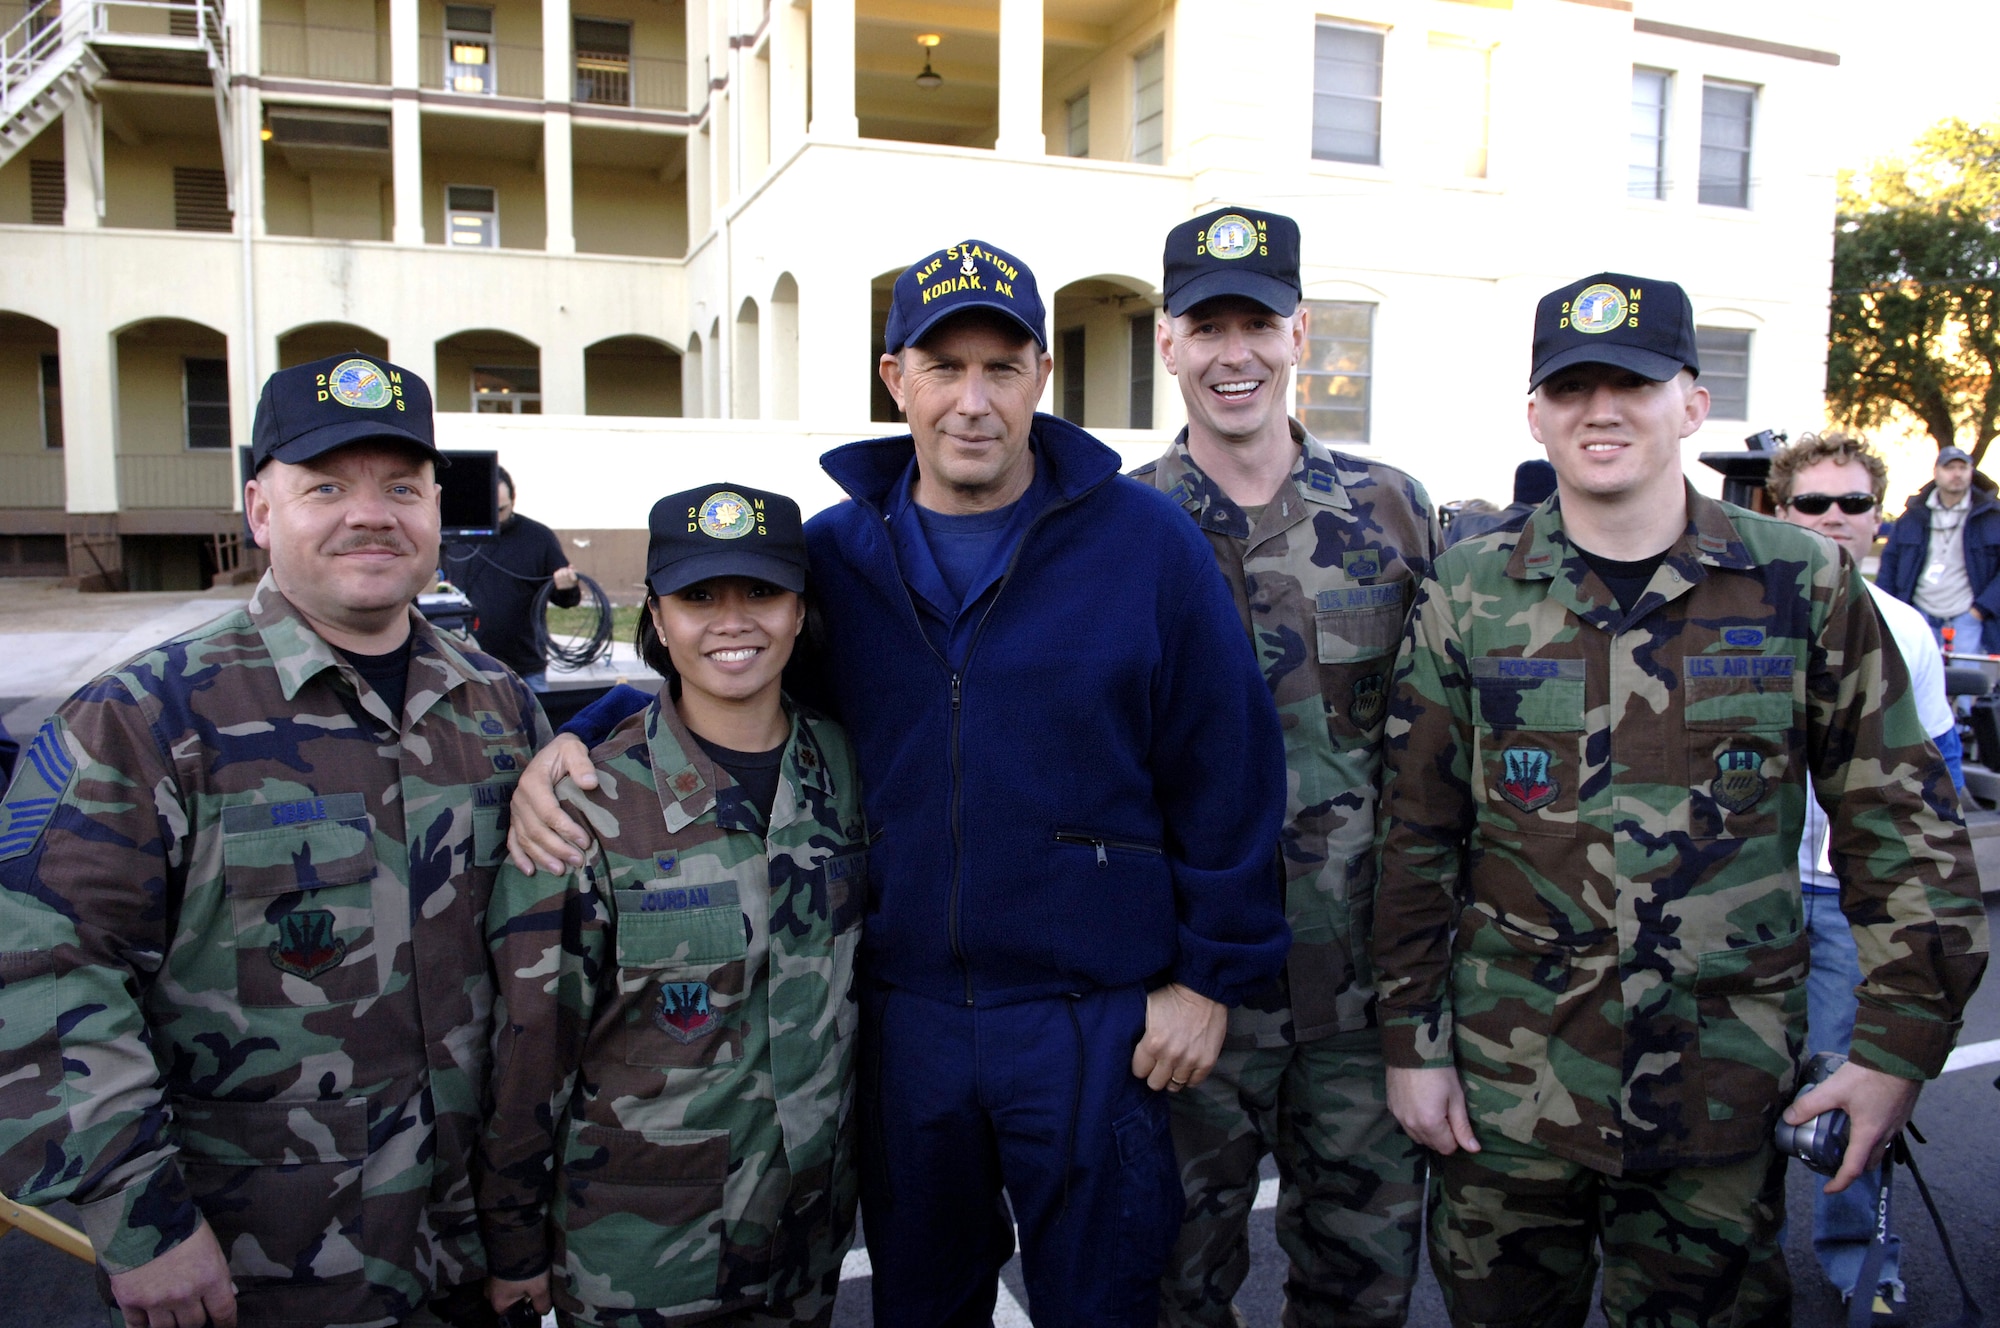 BARKSDALE AIR FORCE BASE, La. (AFPN) -- Kevin Costner poses with Maj. Rose Jourdan, commander of the 2nd Mission Support Squadron, and her staff during a break in filming the movie "The Guardian." Parts of the movie were filmed on base Jan. 12 and 13.  (U.S. Air Force photo by Master Sgt. Michael Kaplan) 